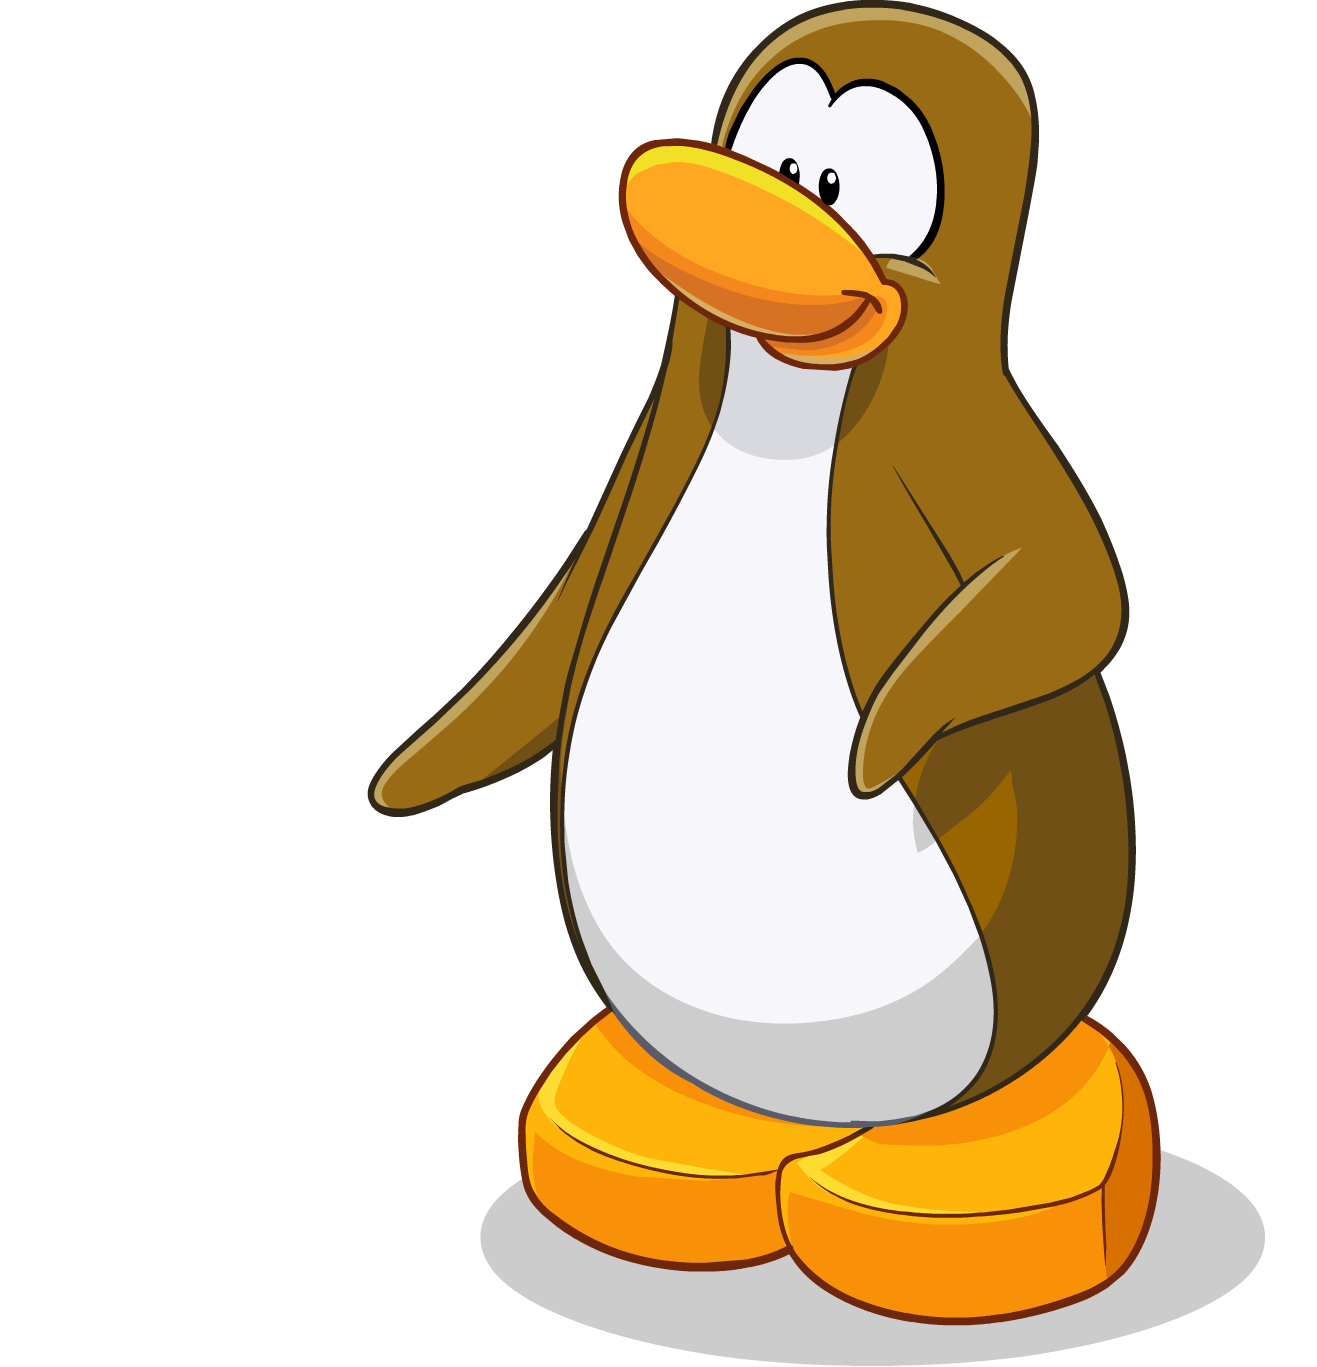 Club Penguin PNG Images